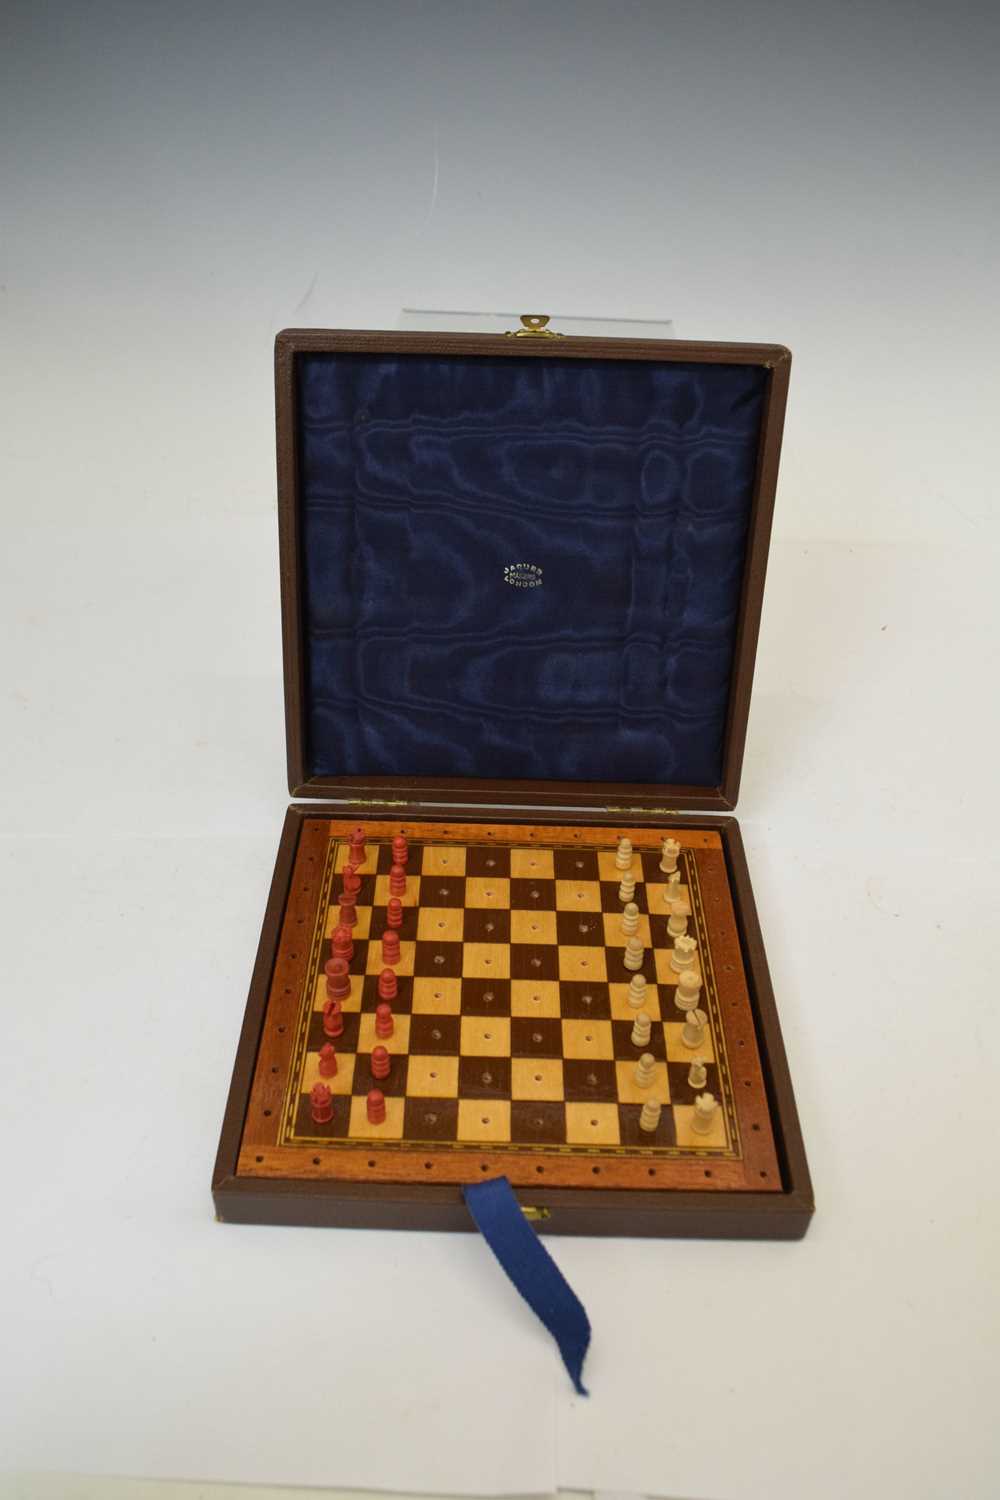 20th century travel chess set by Jaques of London - Image 2 of 7